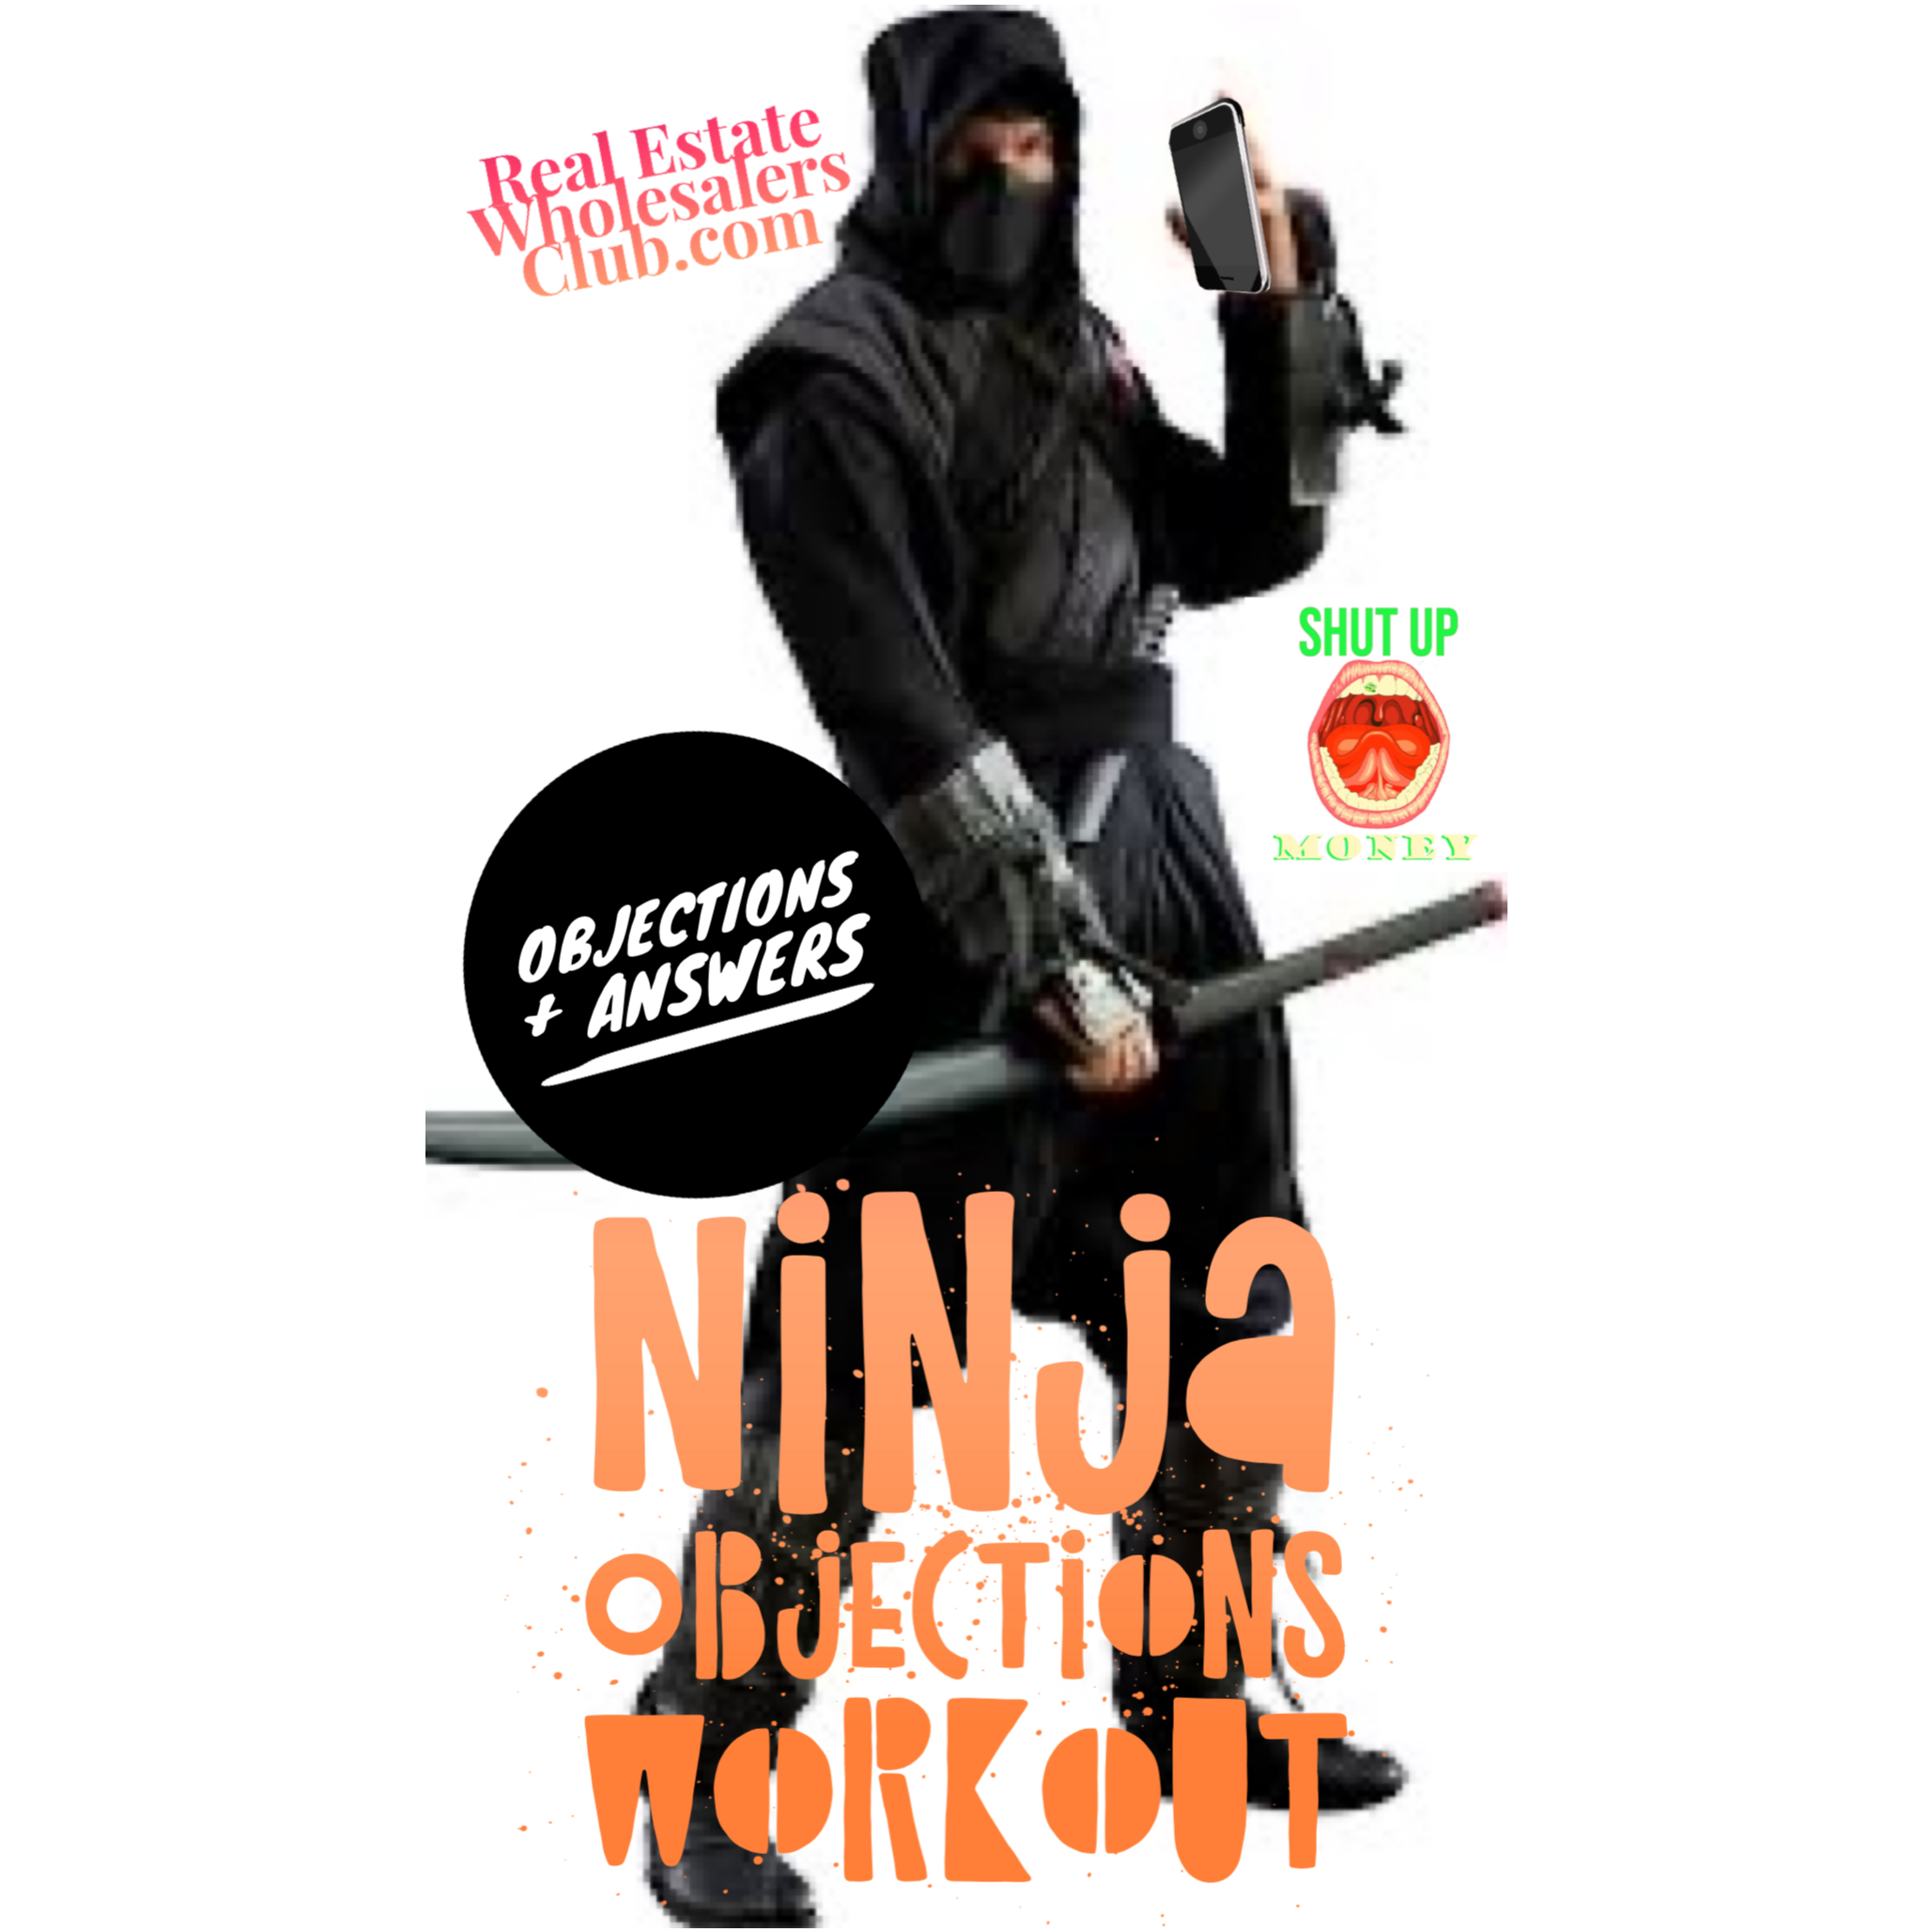 (AUDIO TRAINING FOR CLOSERS) Lease Options Wholesaling Ninja Objections Training (Seller Objections + Answers)